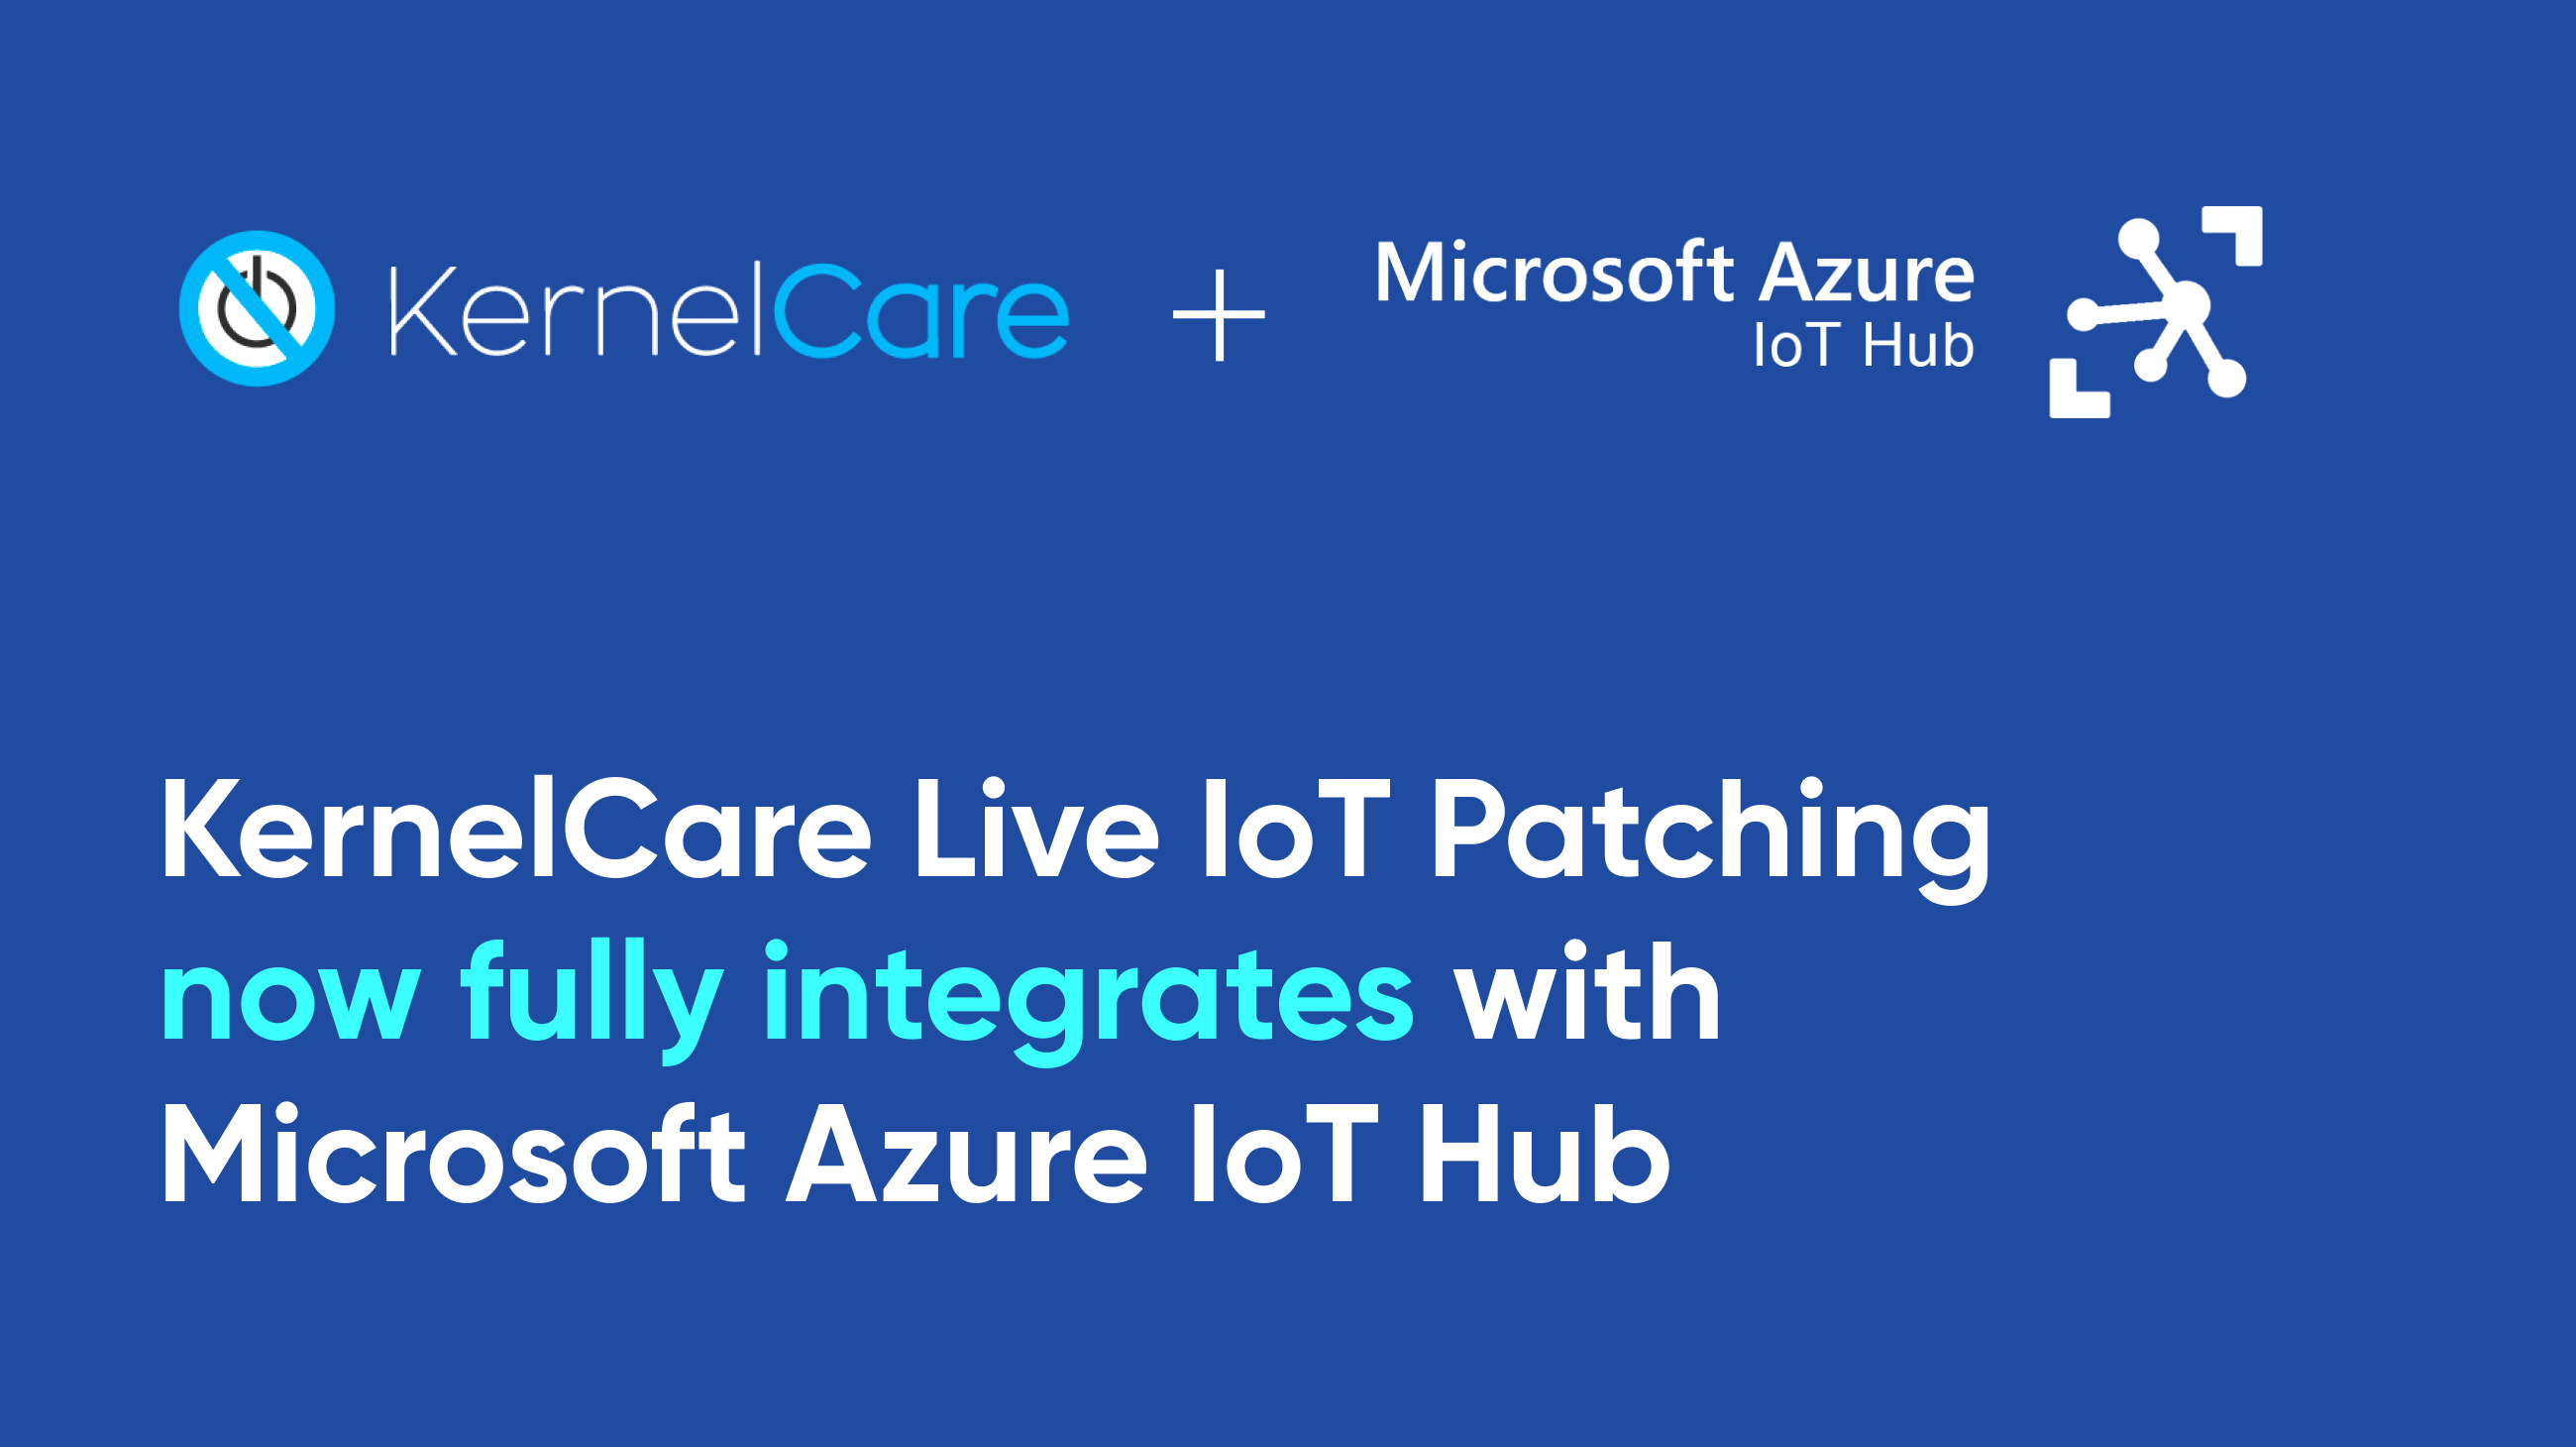 KernelCare Live IoT Patching now fully integrates with Microsoft Azure IoT Hub